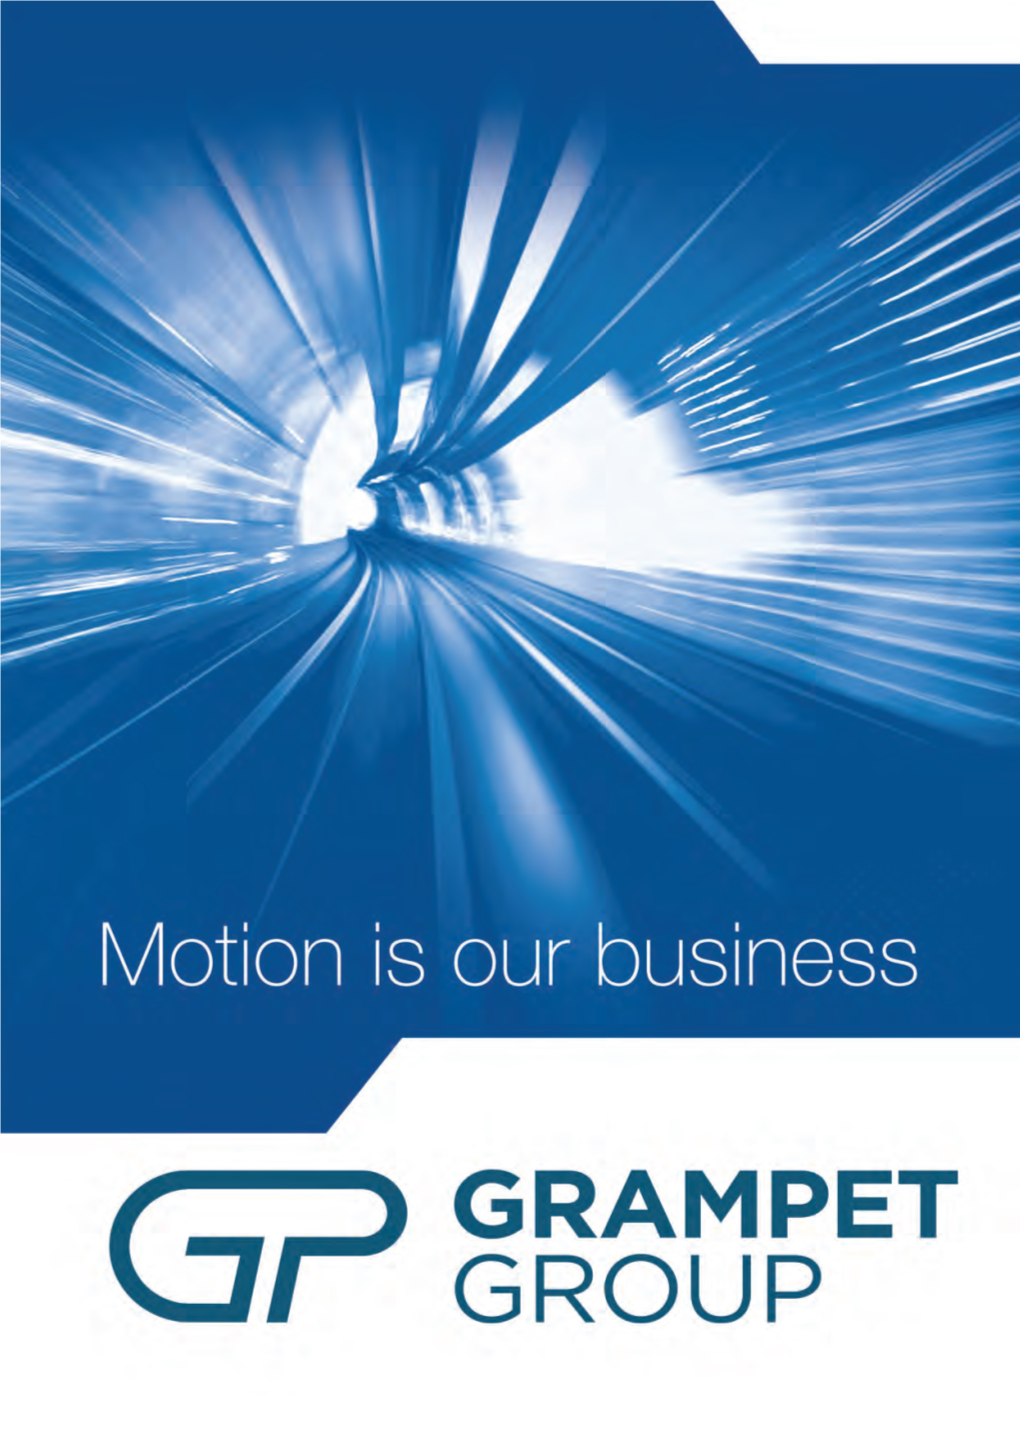 Grampet Group Company 2